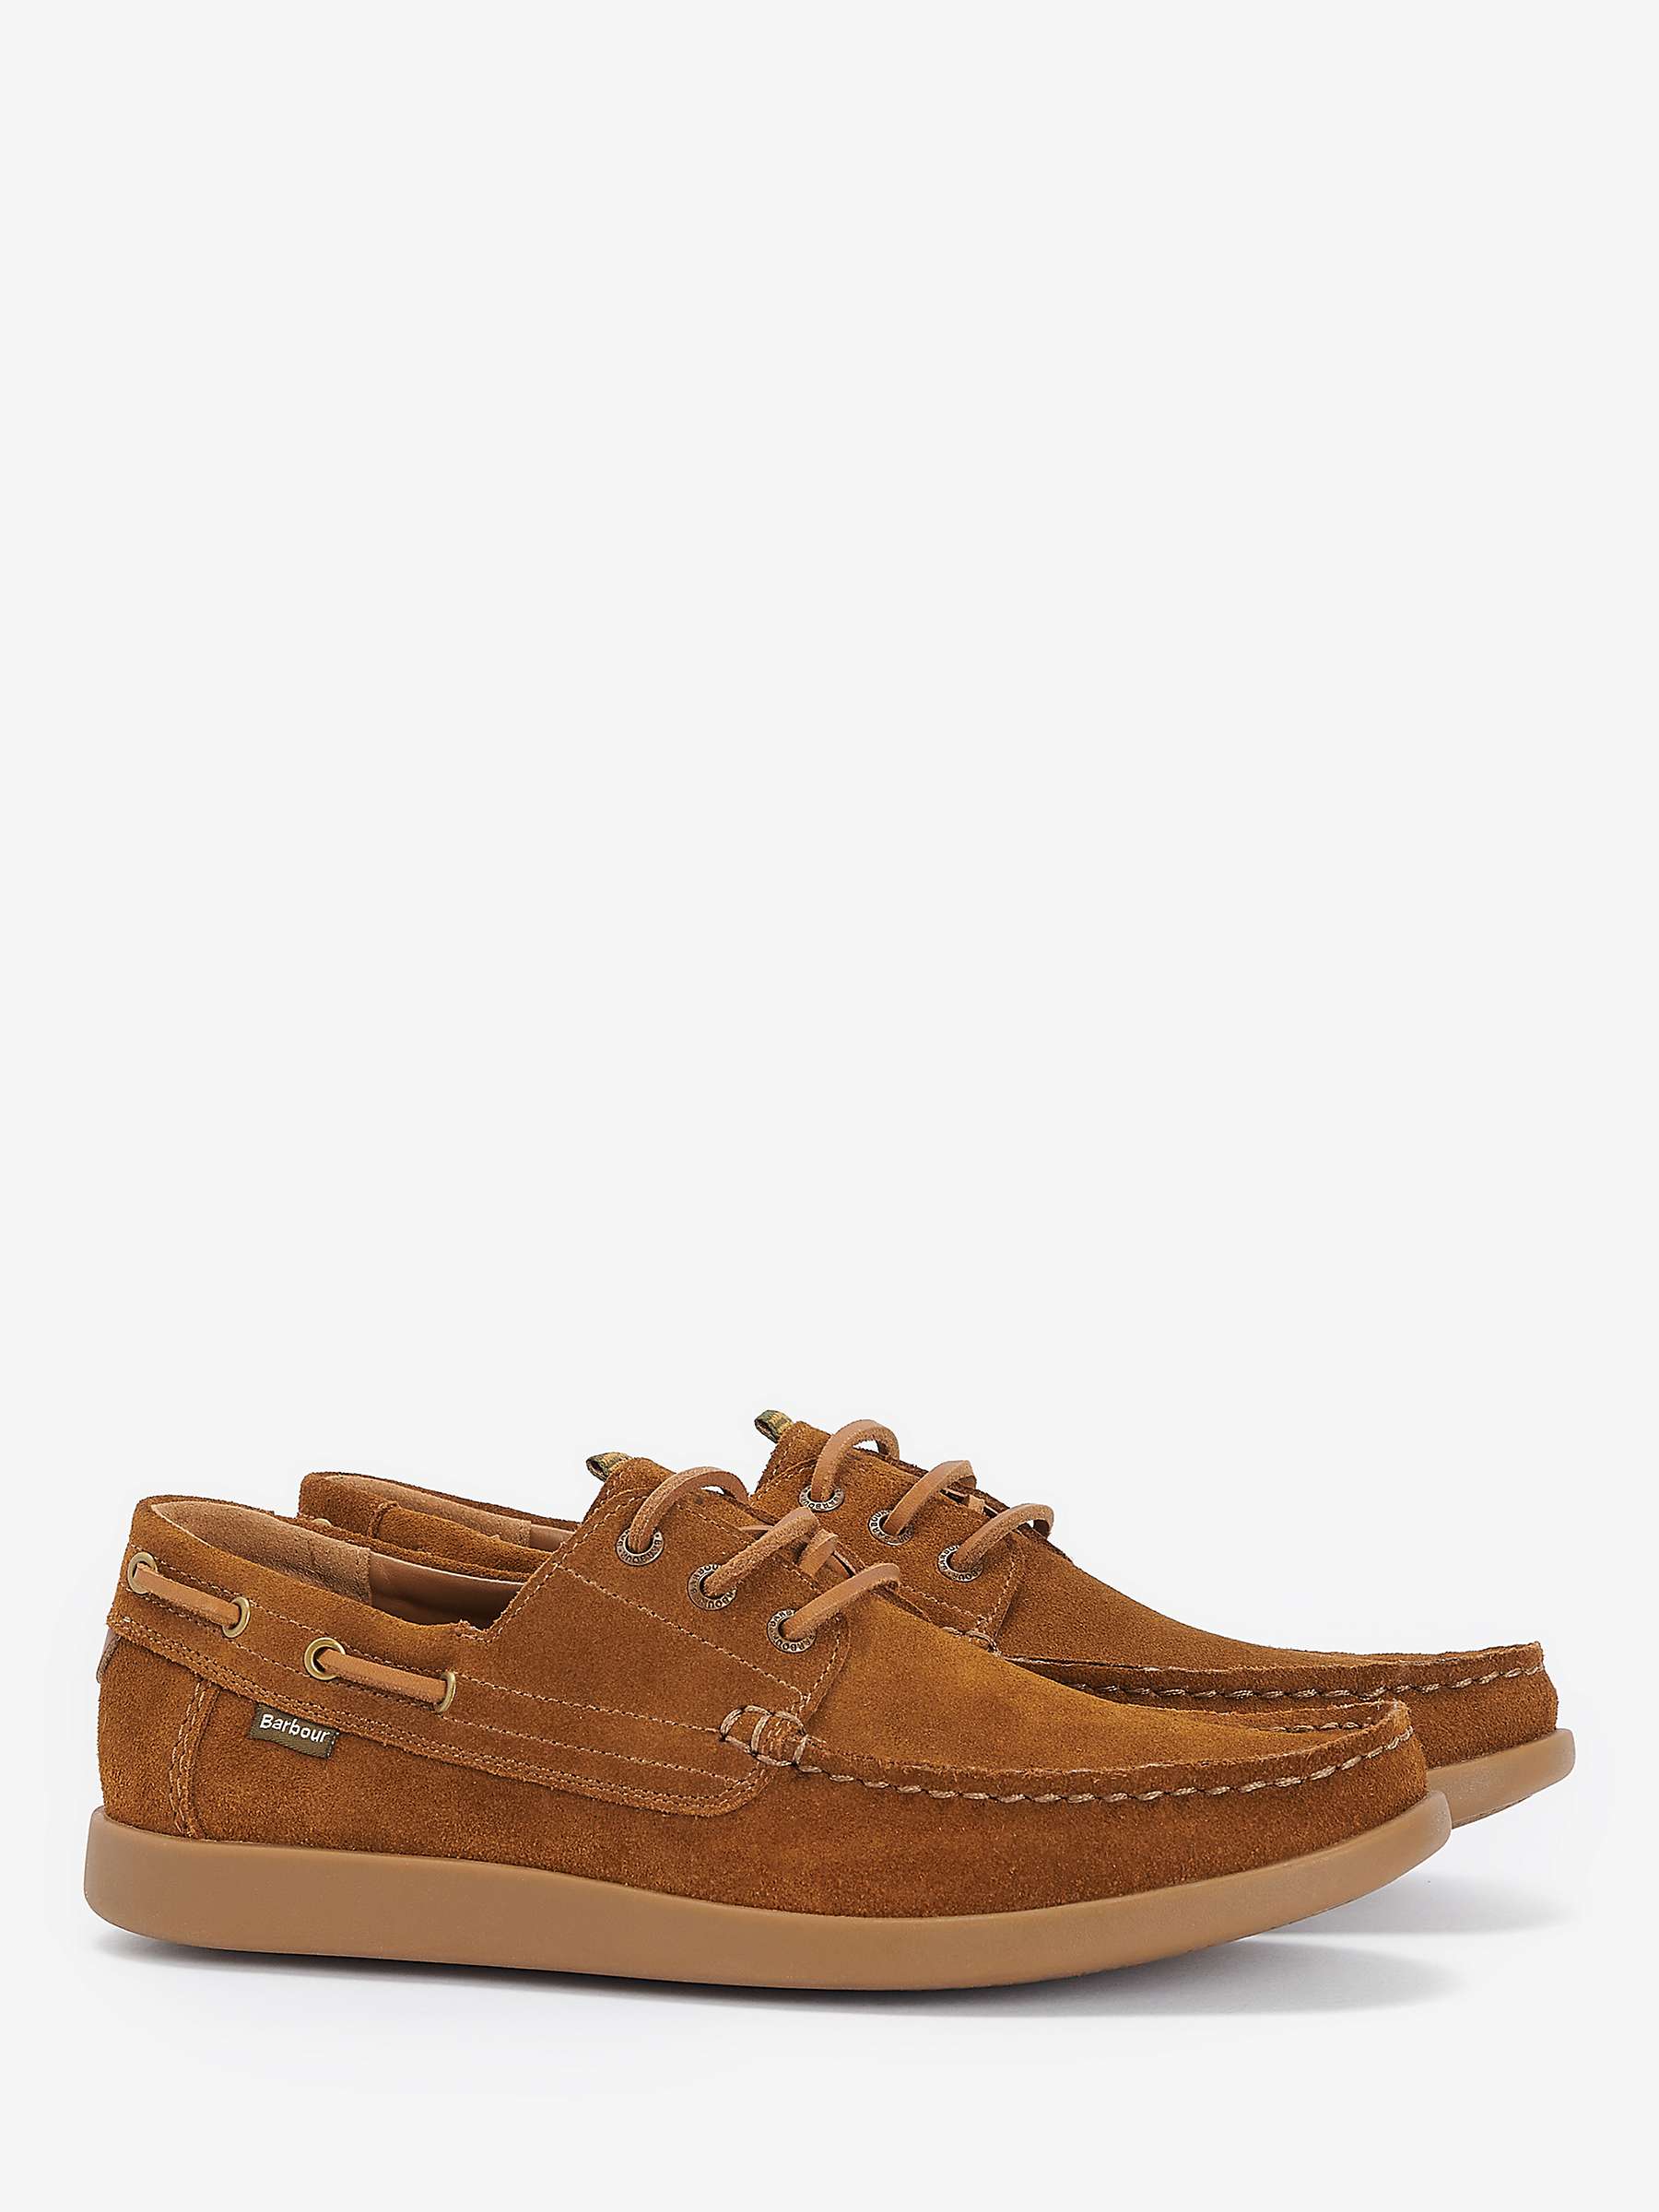 Buy Barbour Armada Boat Shoes, Brown Online at johnlewis.com